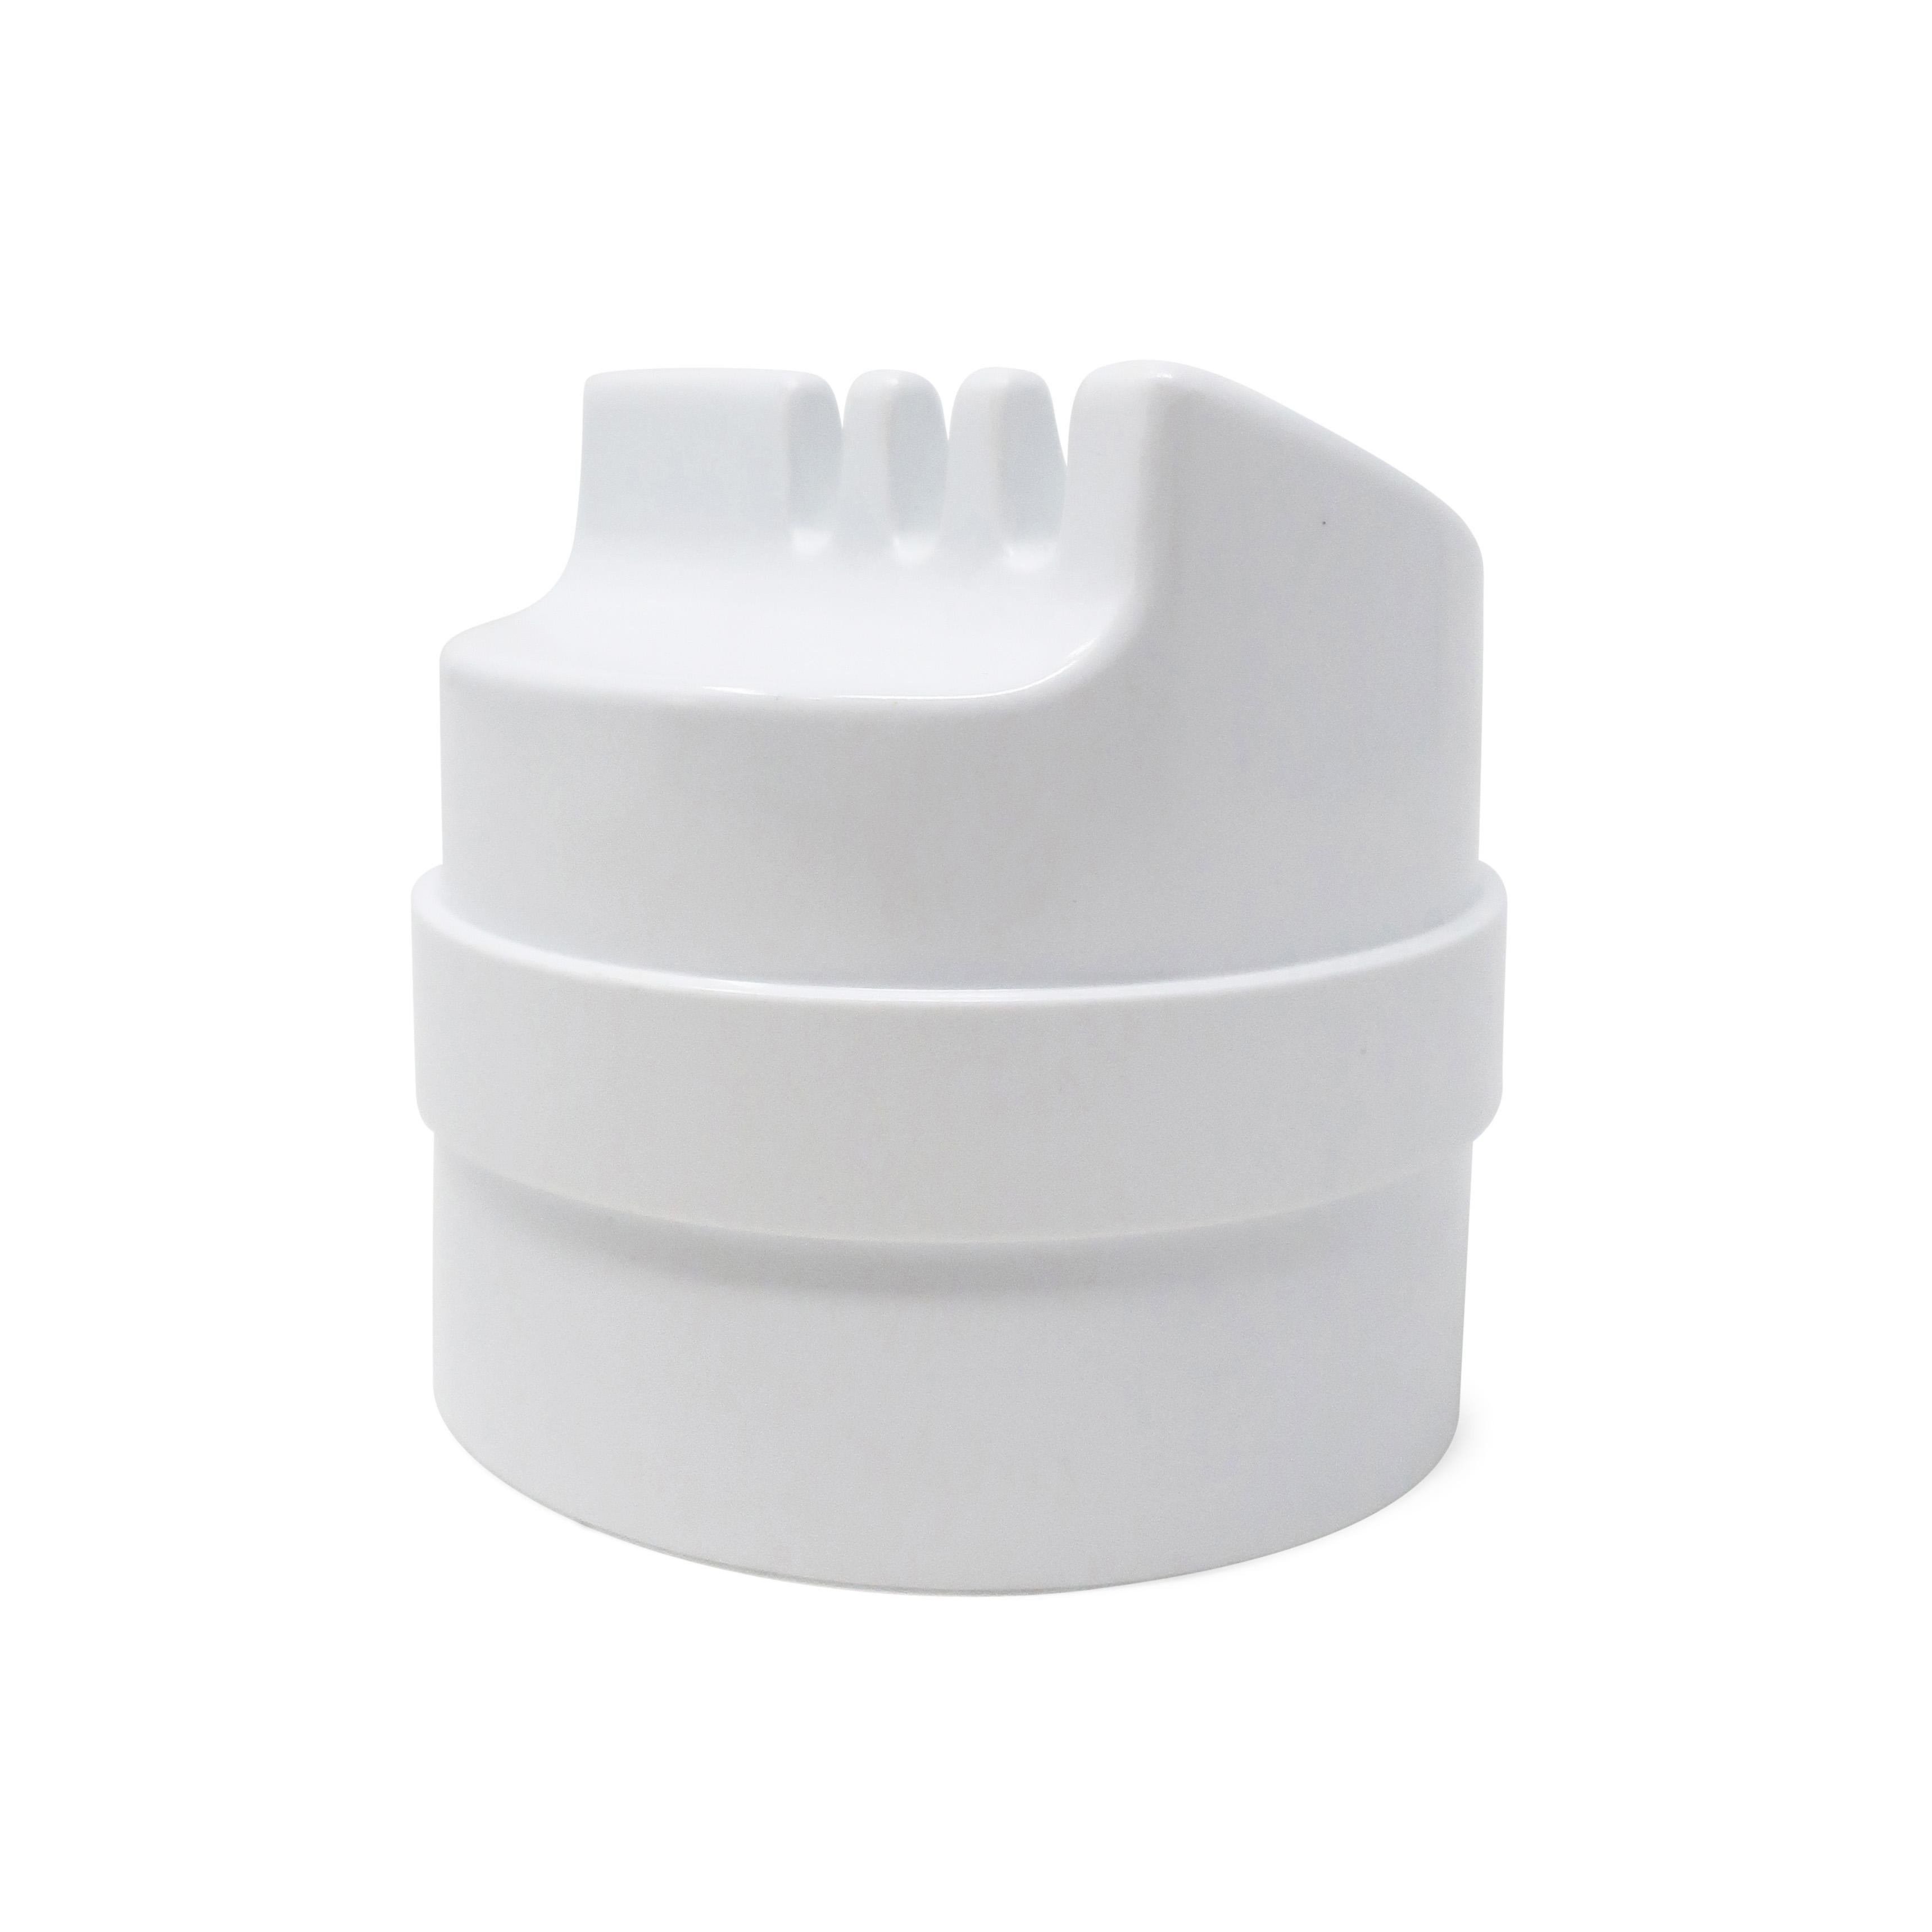 Originally designed in 1970 and produced by Kartell in 1973 two years after designer Joe Colombo's death, the Kartell 4630 Roto/Rotocenere ashtray is Colombo at his finest. White plastic construction with beautiful lines and a thoughtful design that